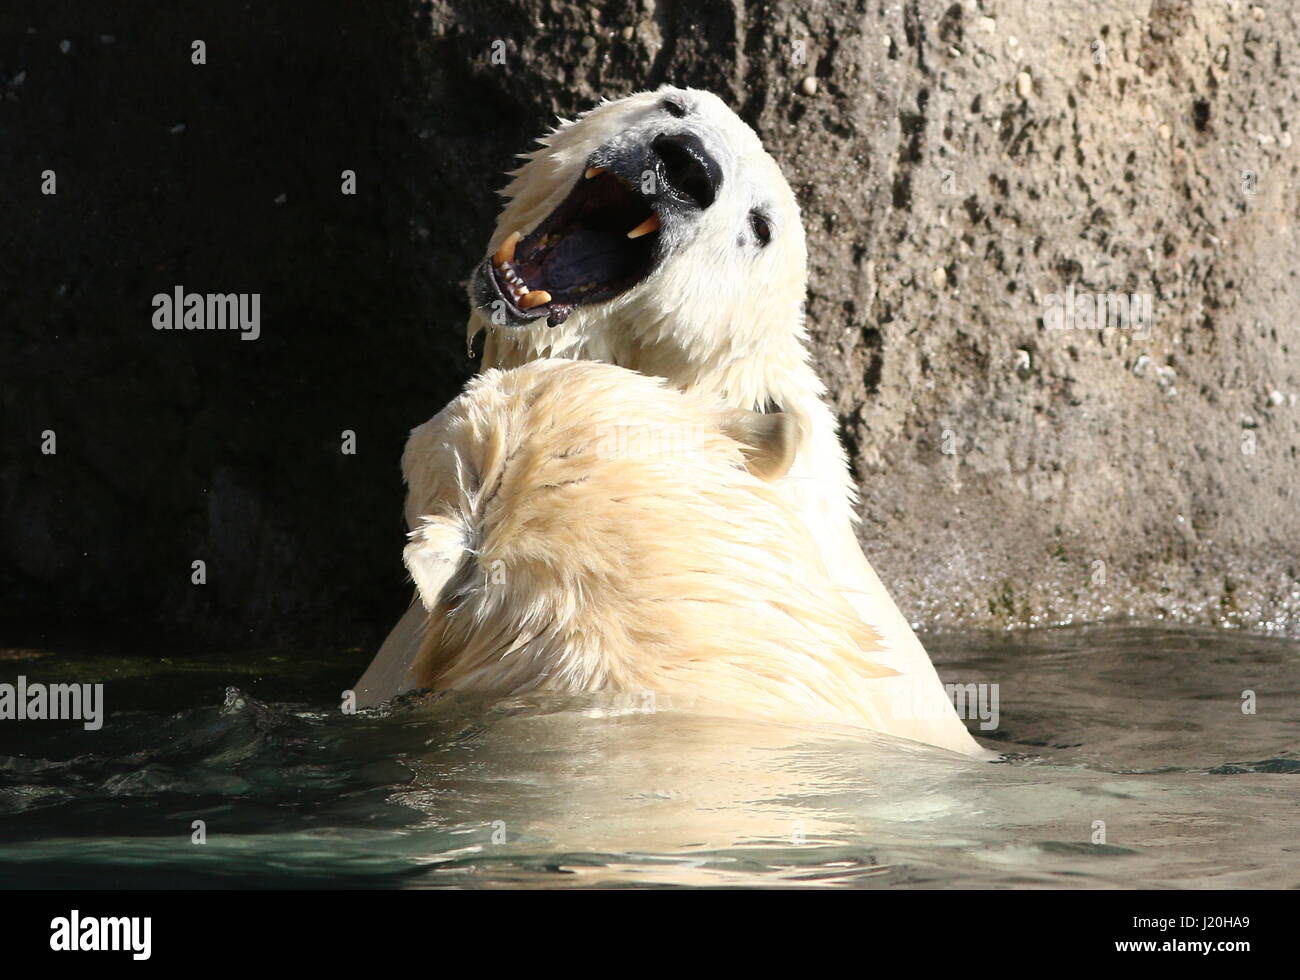 Aggressive Polar bears (Ursus maritimus) fighting in the water, one snarling Stock Photo